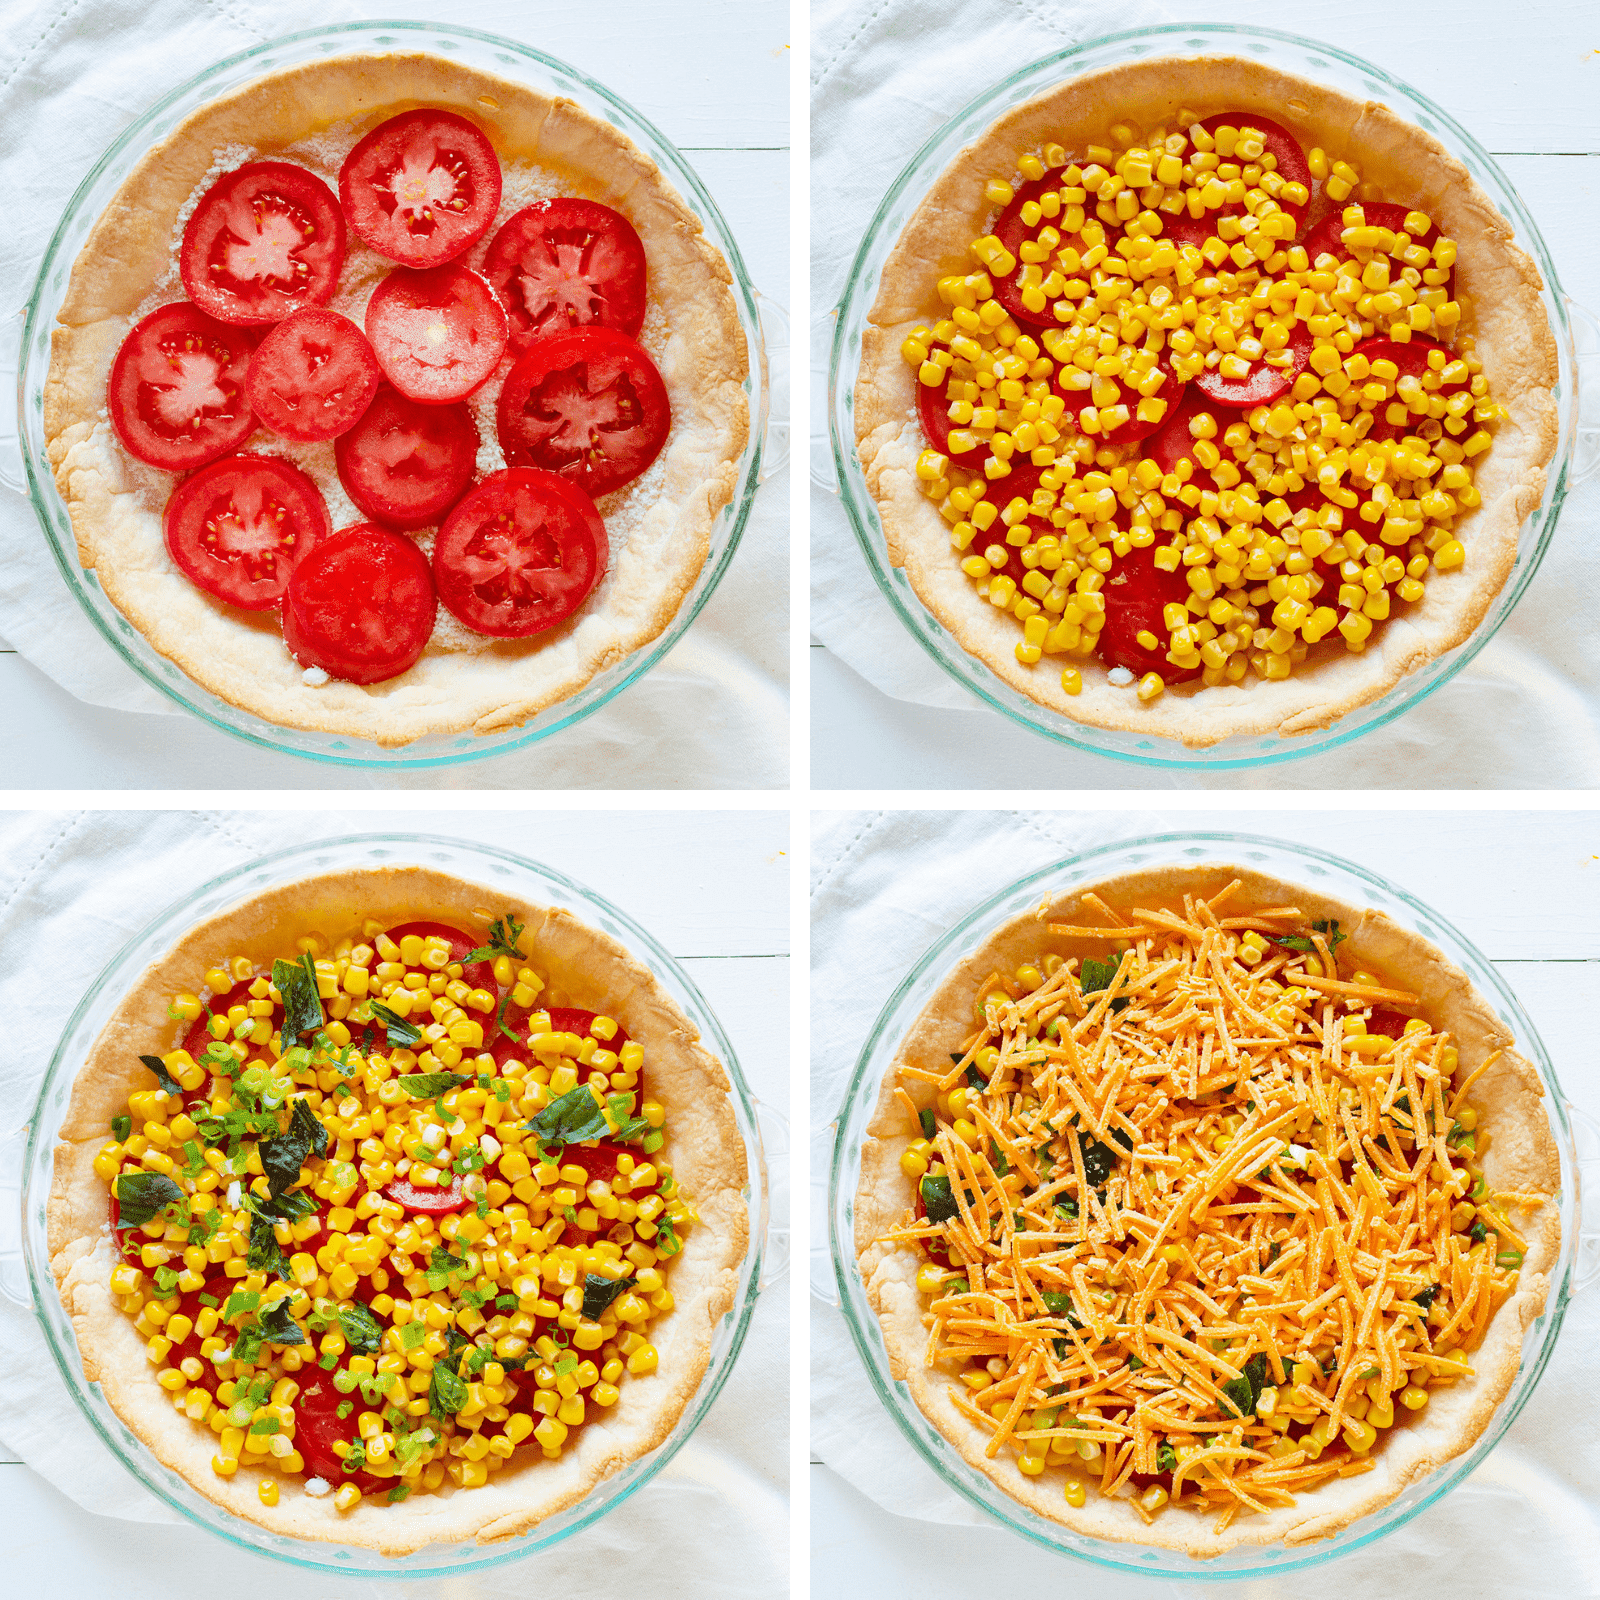 Layers of Tomato and Corn Pie